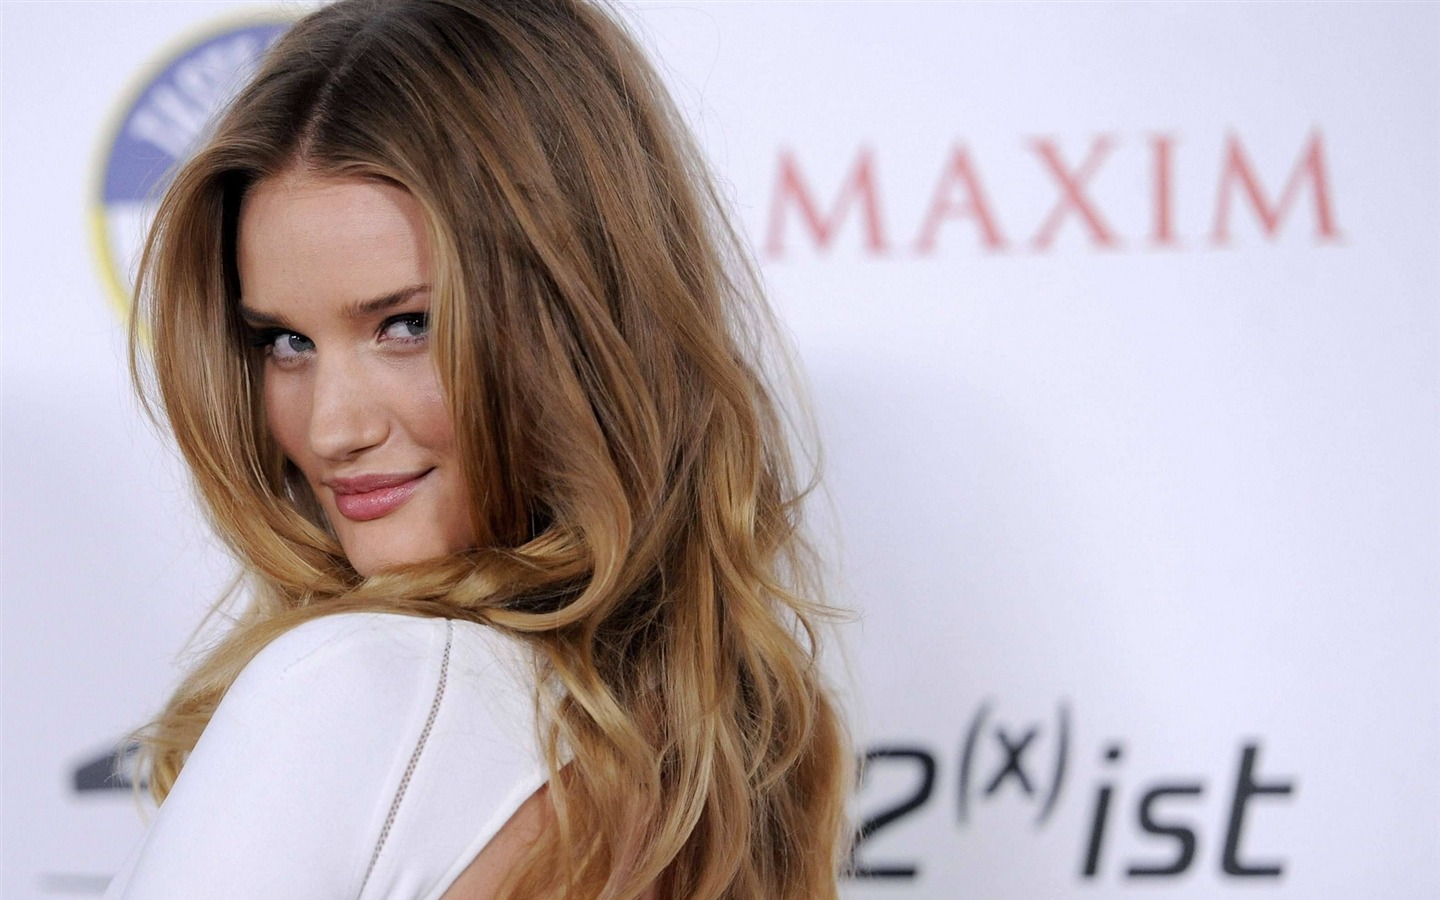 Rosie Huntington Whiteley #007 - 1440x900 Wallpapers Pictures Photos Images